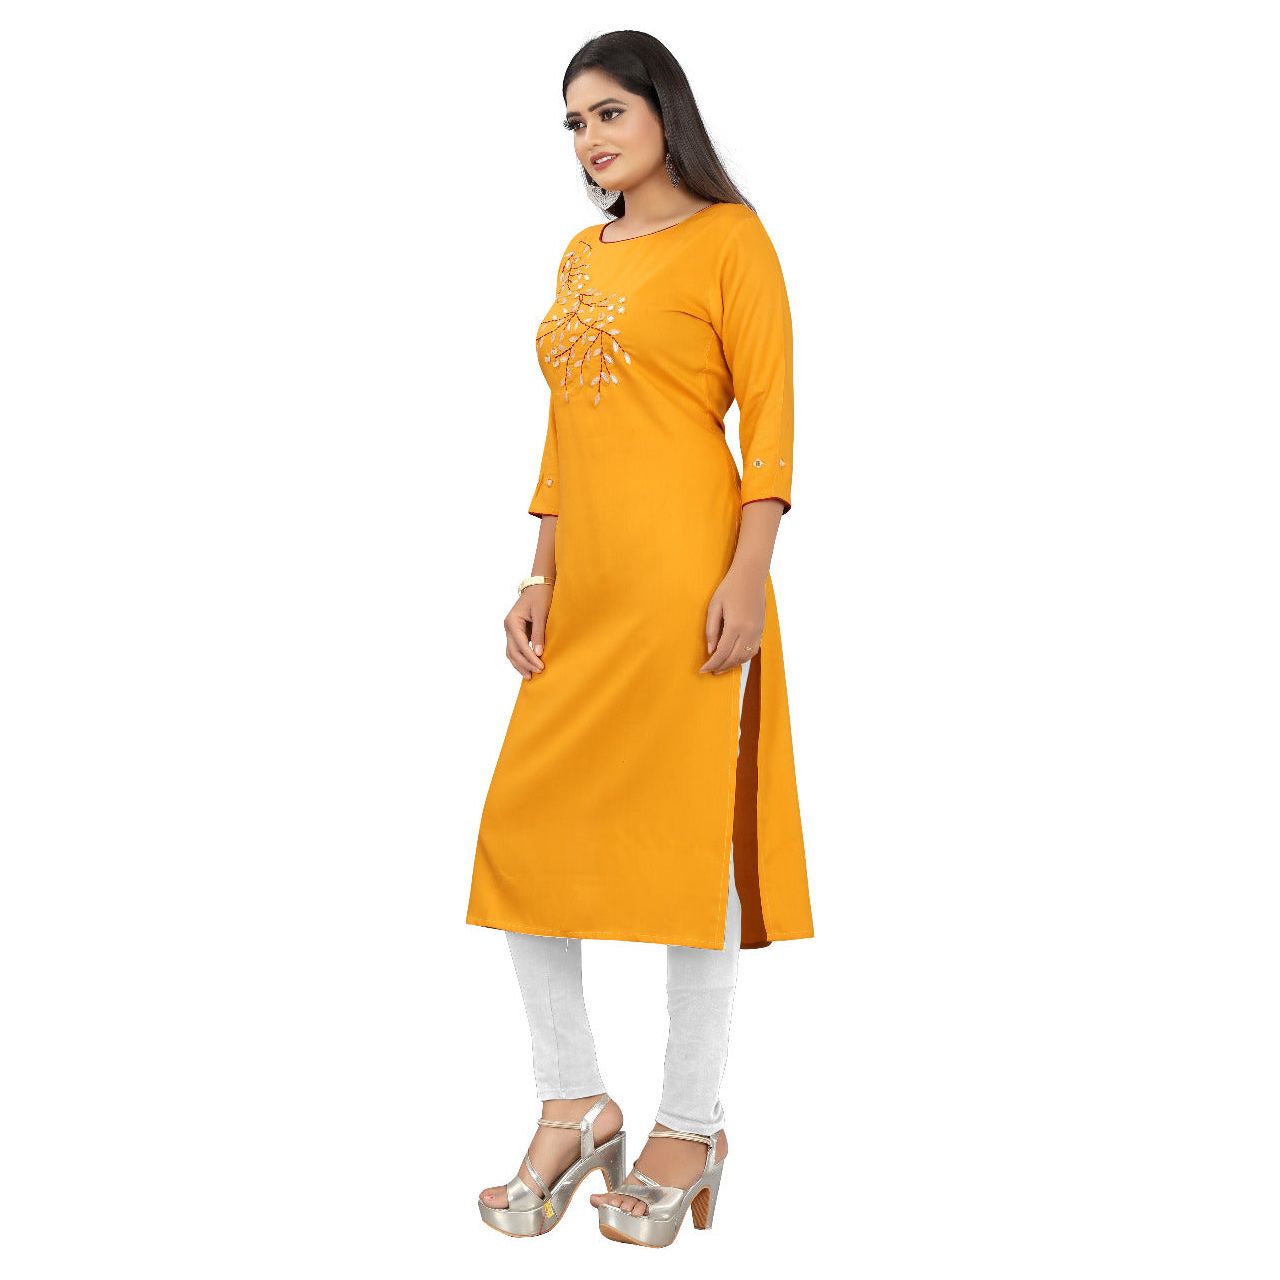 Daffodil Yellow Mirror Work Embroidered Indian Tunic Top for Women